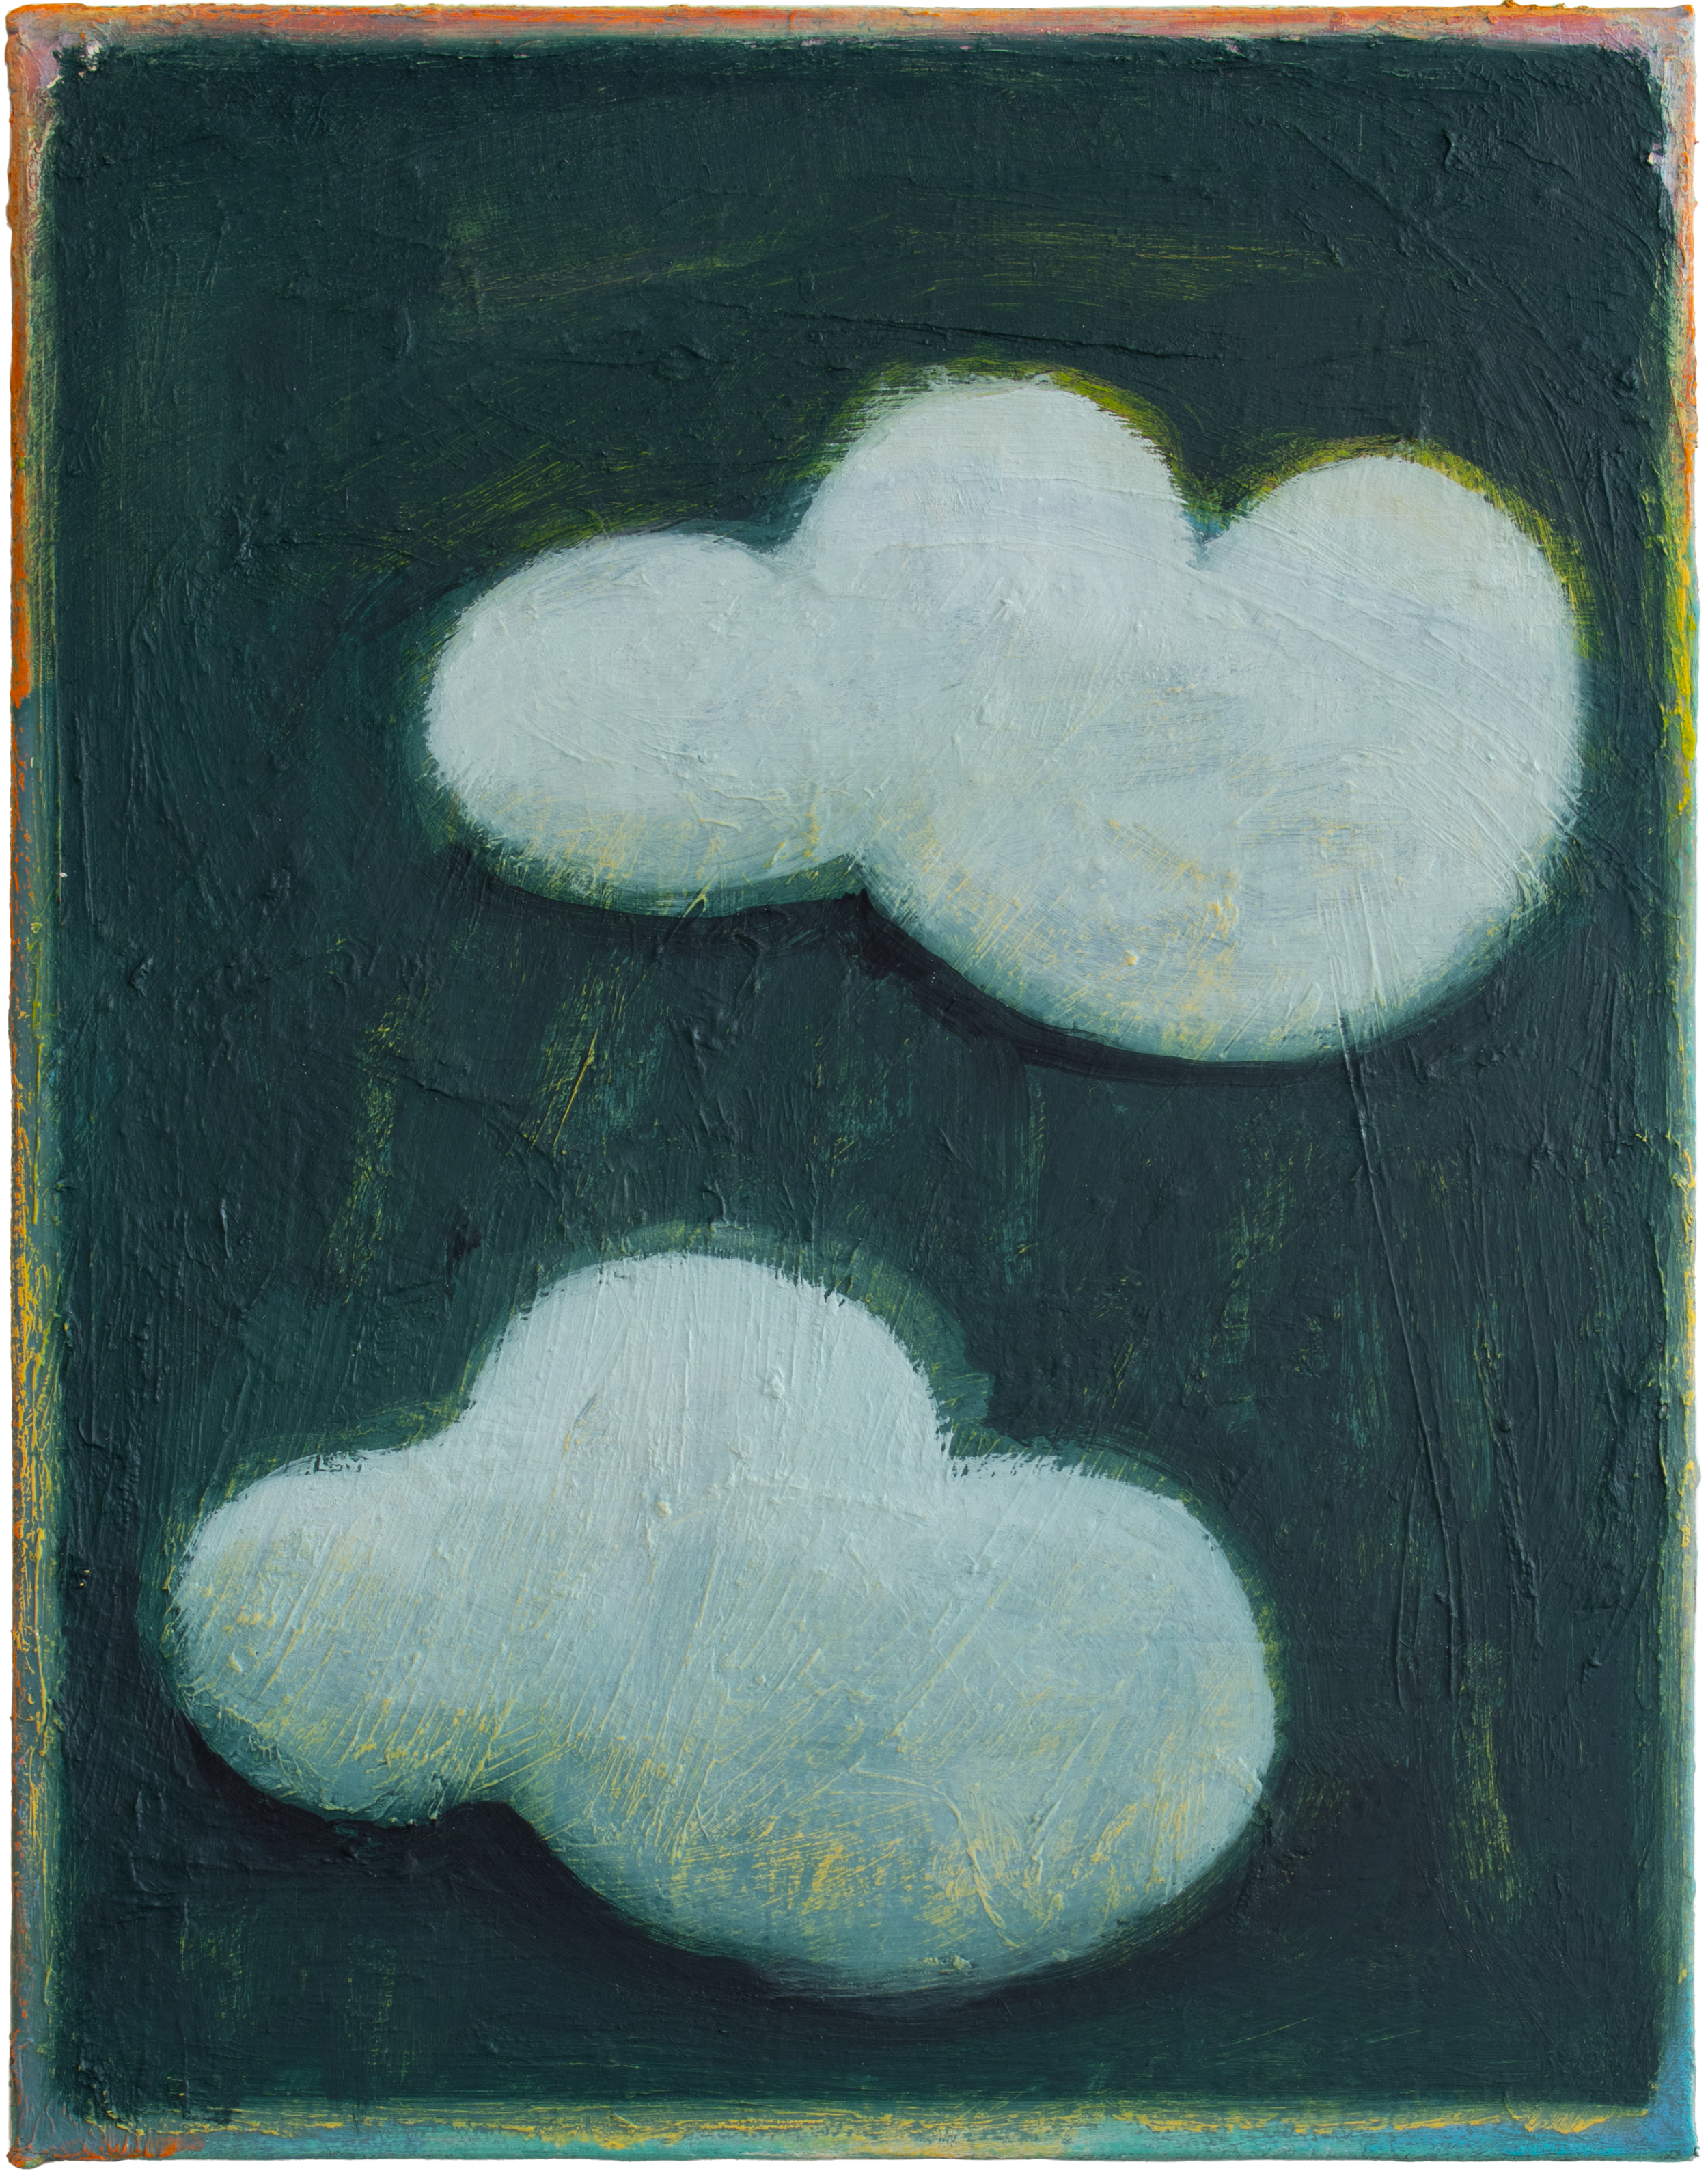     Two Clouds on Green                                                          oil on canvas, 11 x 14 in.     